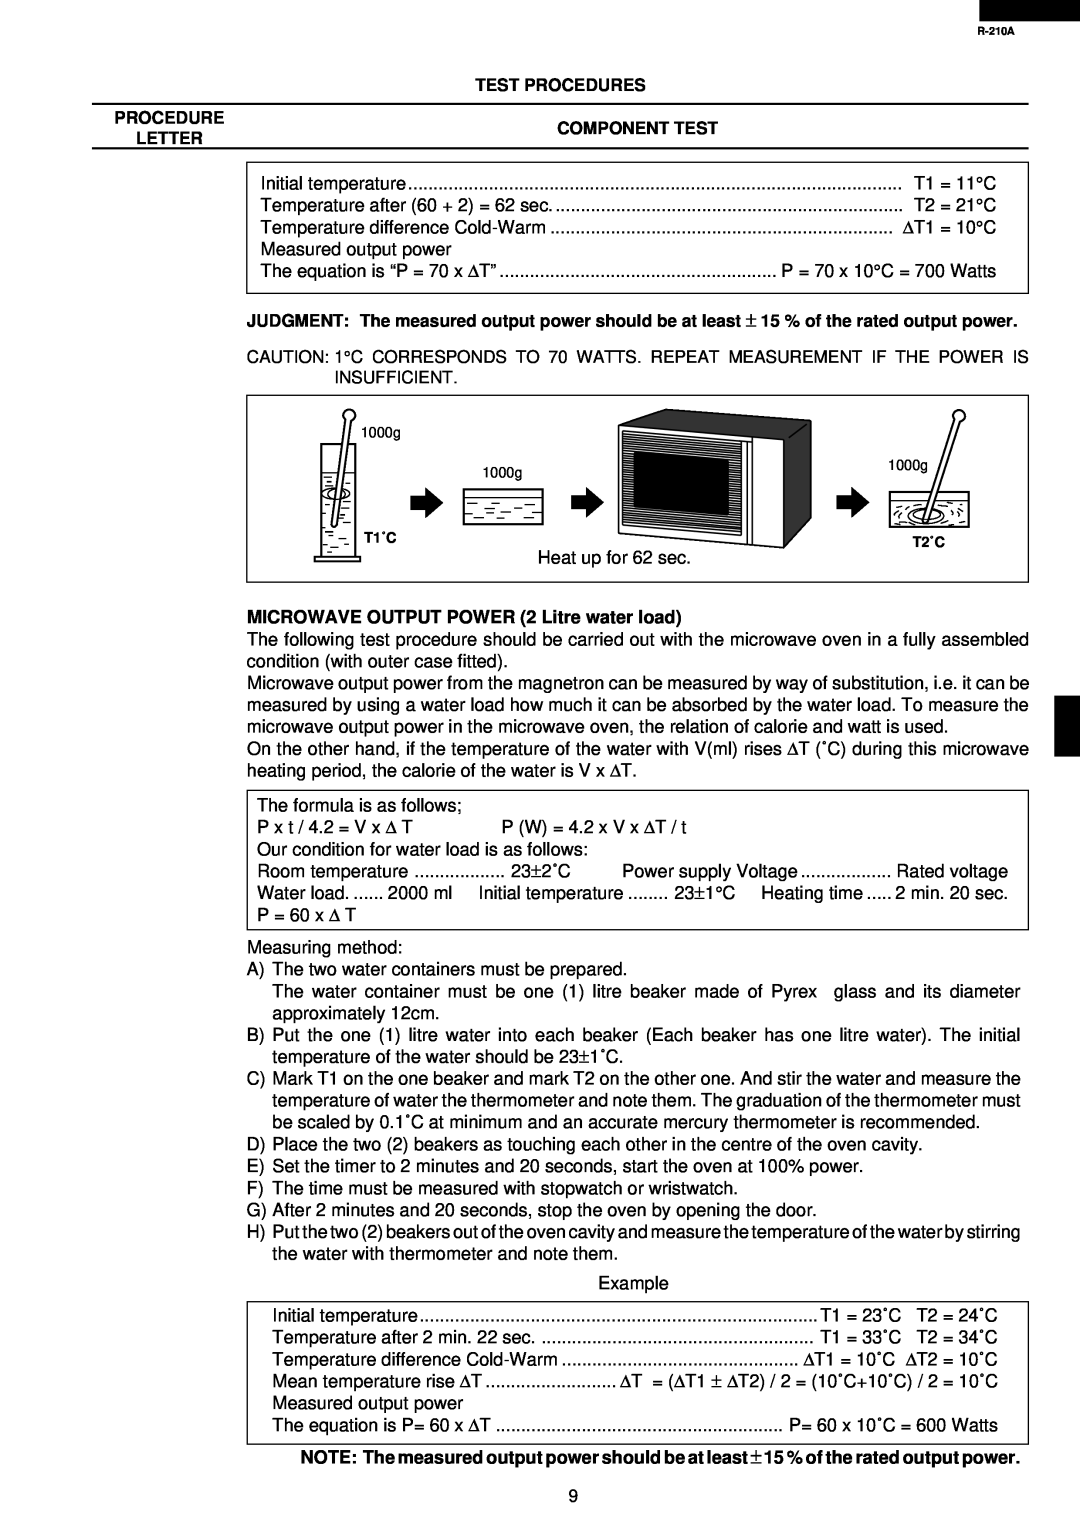 Sharp R-210A specifications Test Procedures, Component Test, Letter, MICROWAVE OUTPUT POWER 2 Litre water load 